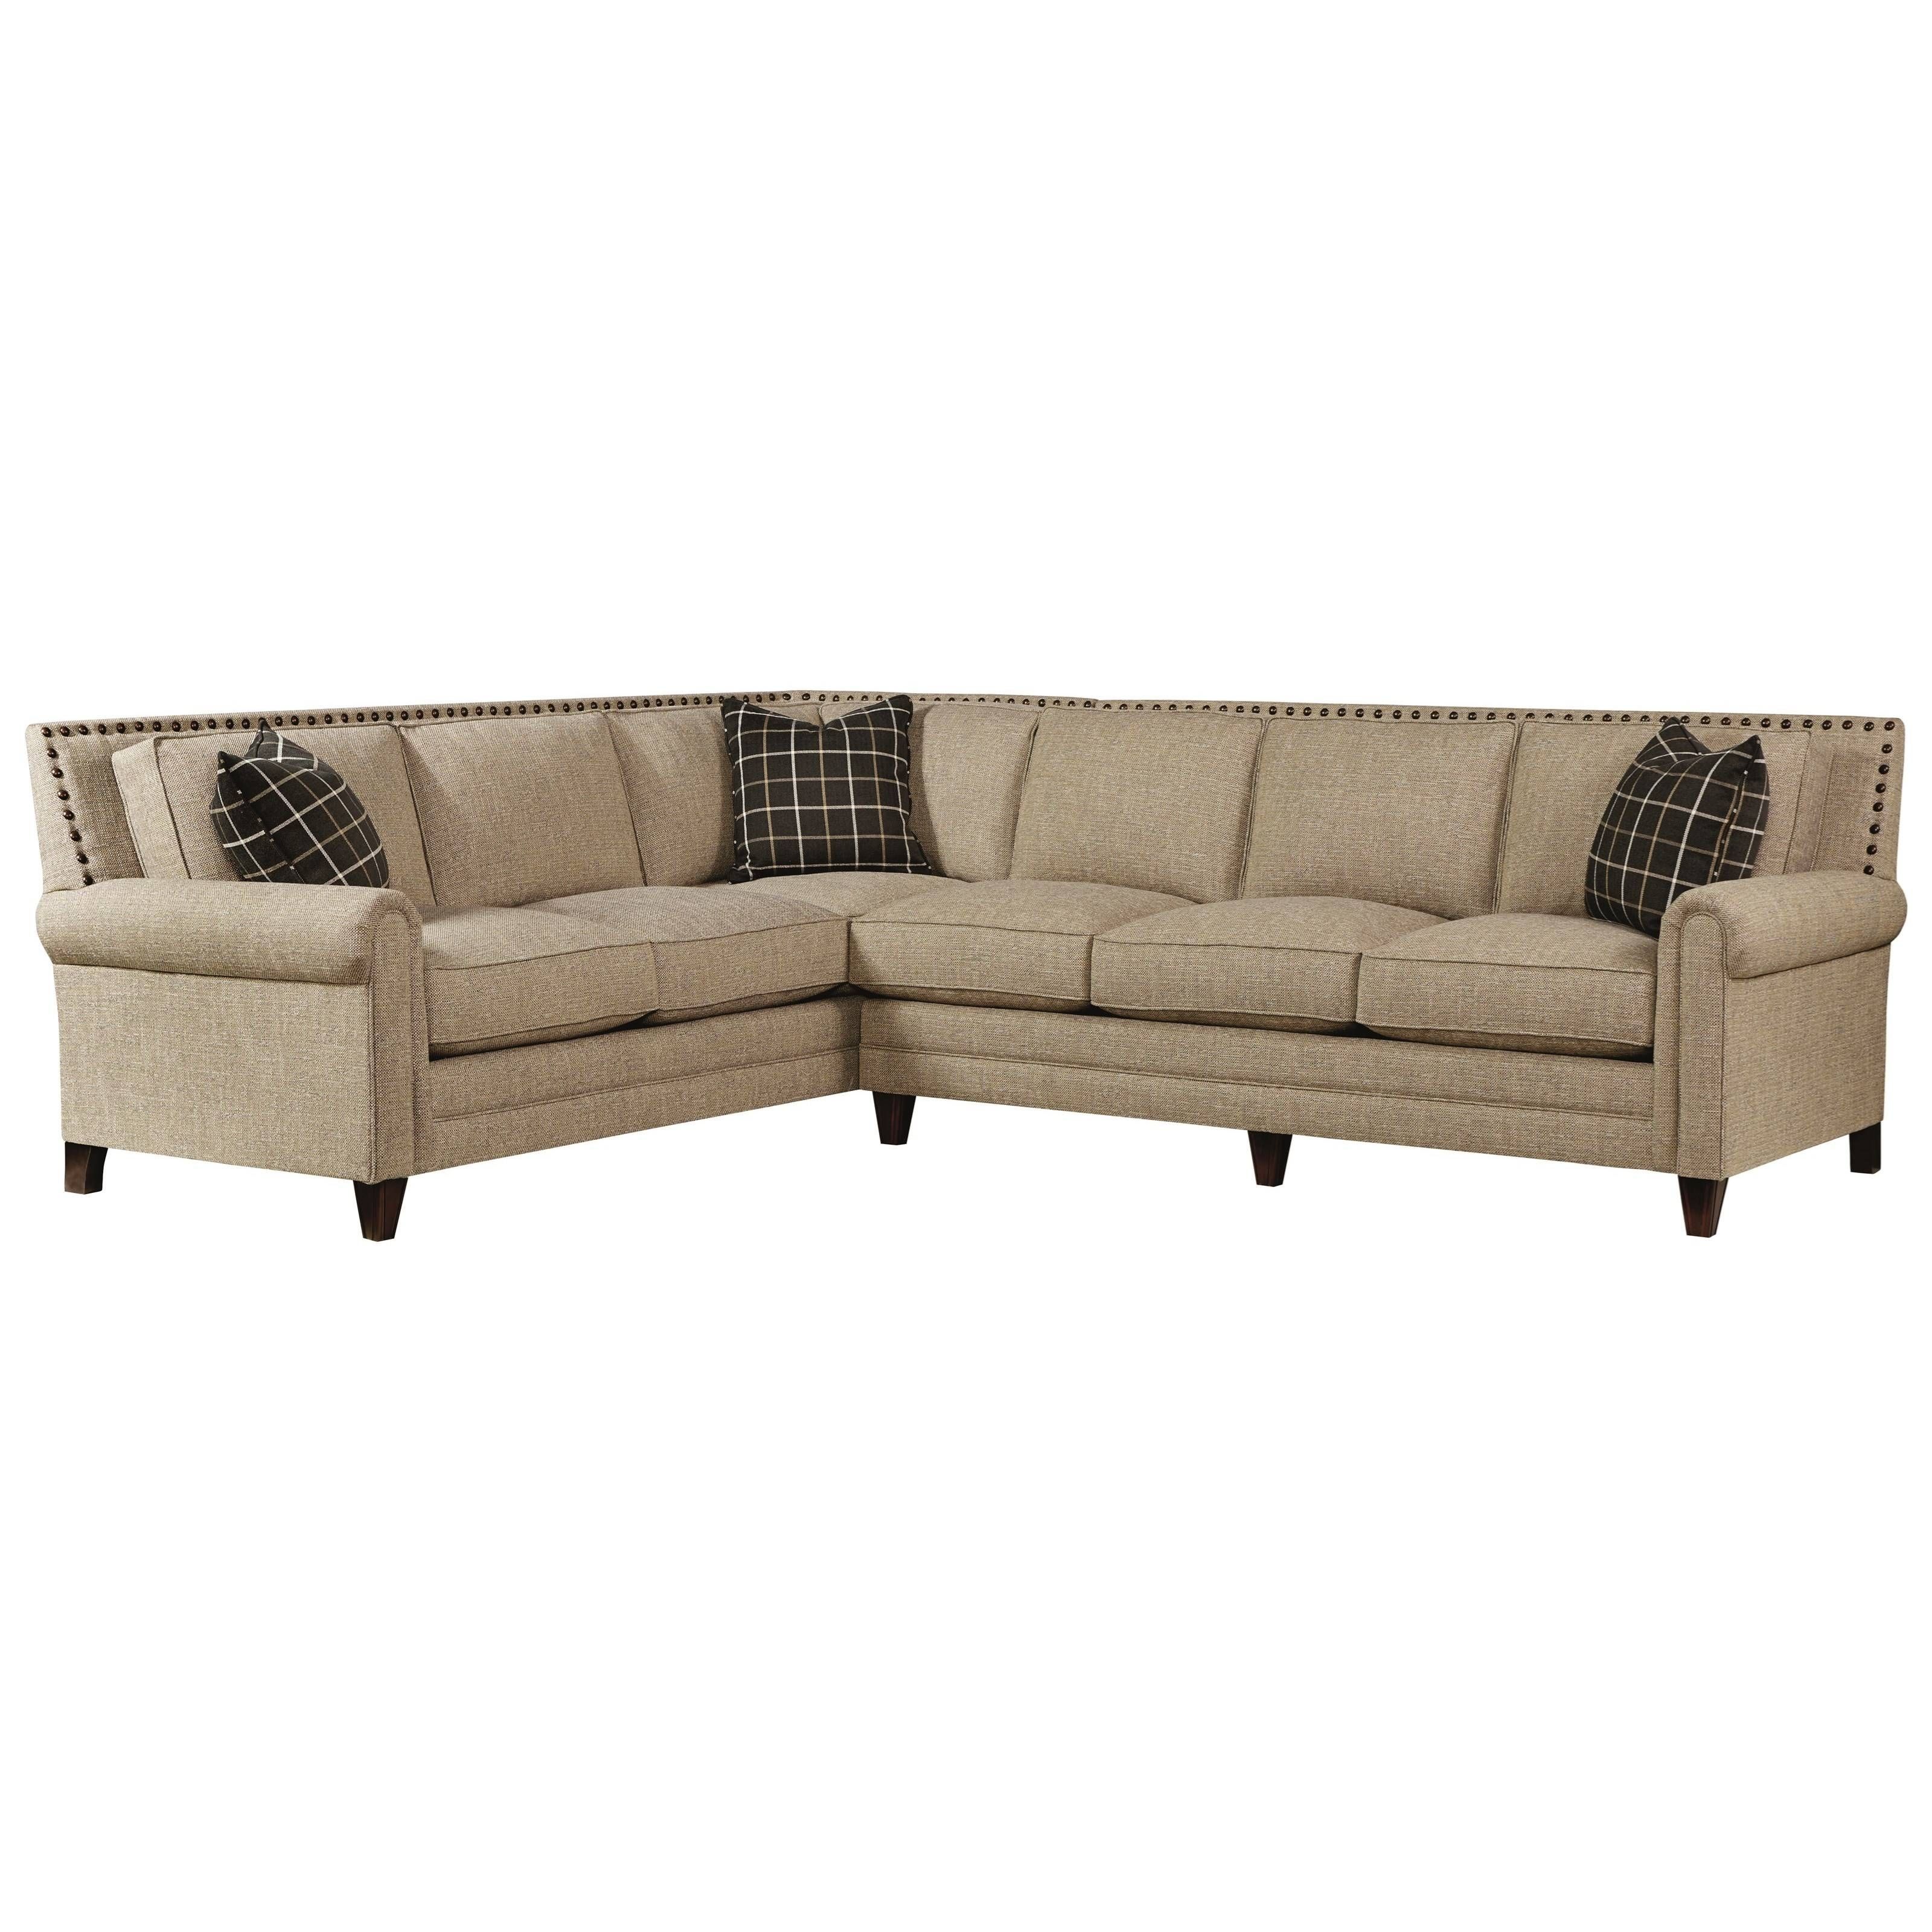 Bassett Harlan Sectional Sofa With 5 Seats – Dunk & Bright Inside Bassett Sectional Sofa (View 11 of 30)